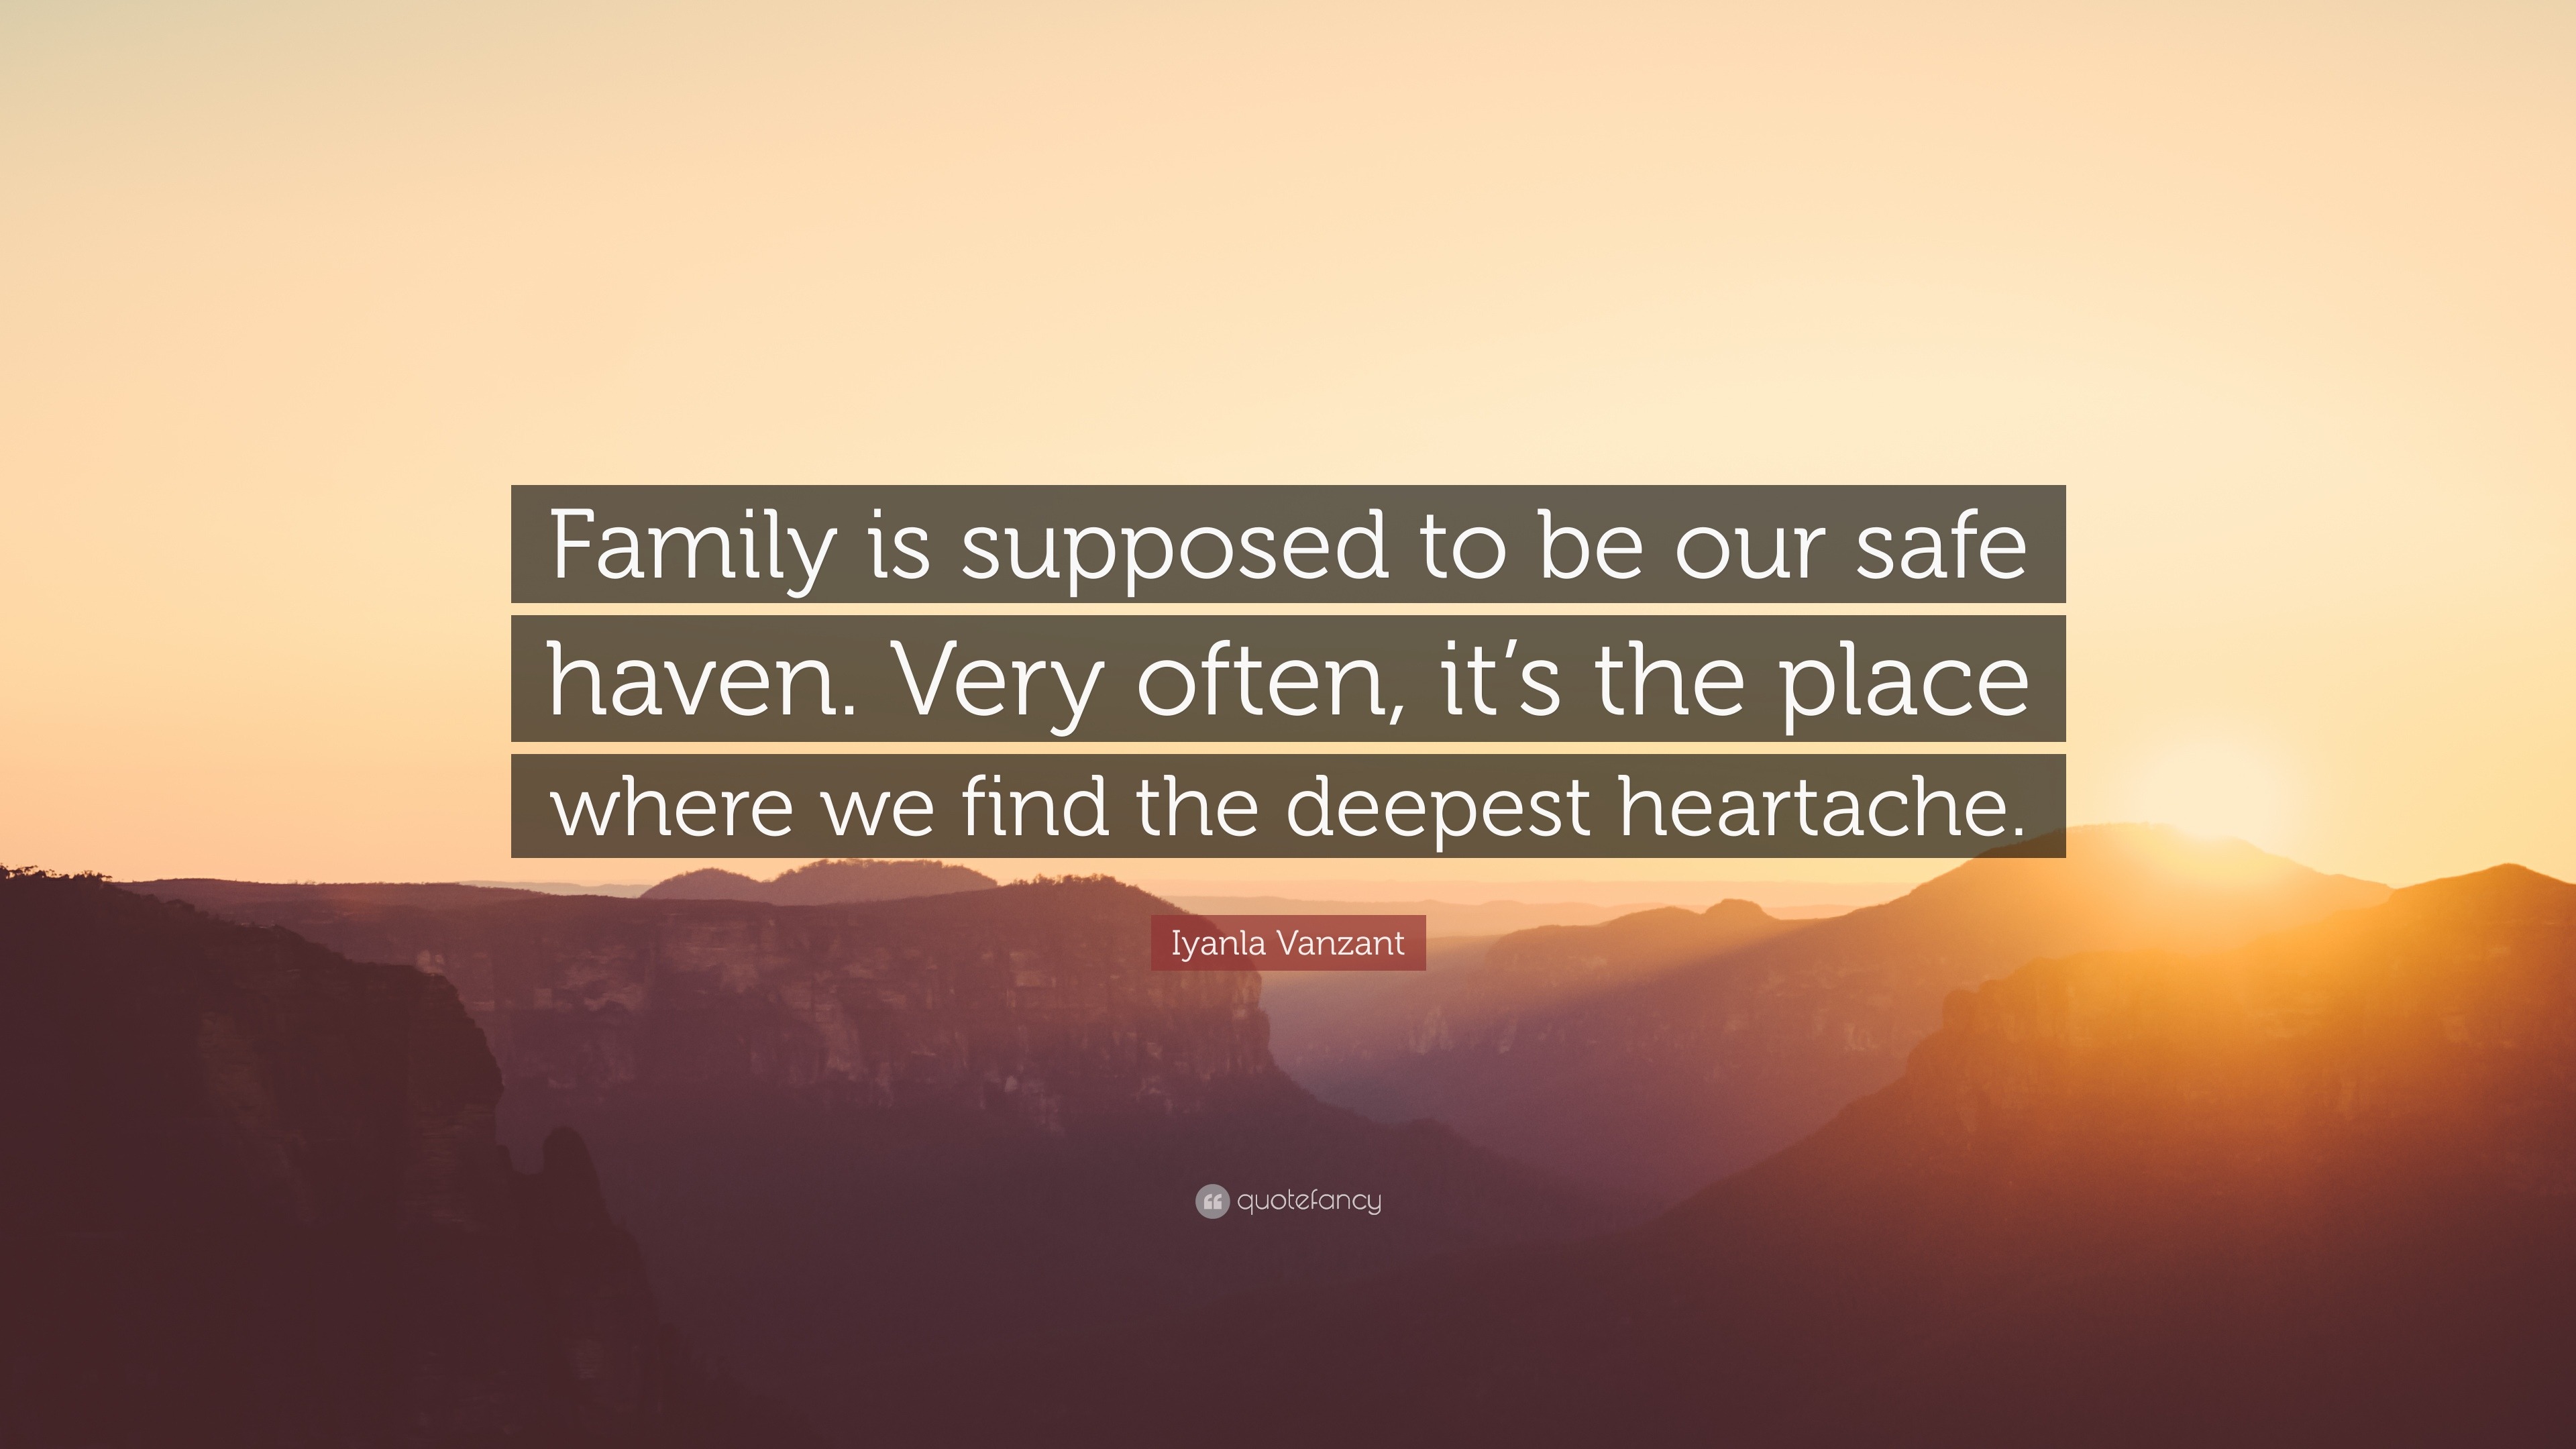 Iyanla Vanzant Quote: “Family Is Supposed To Be Our Safe Haven. Very Often, It's The Place